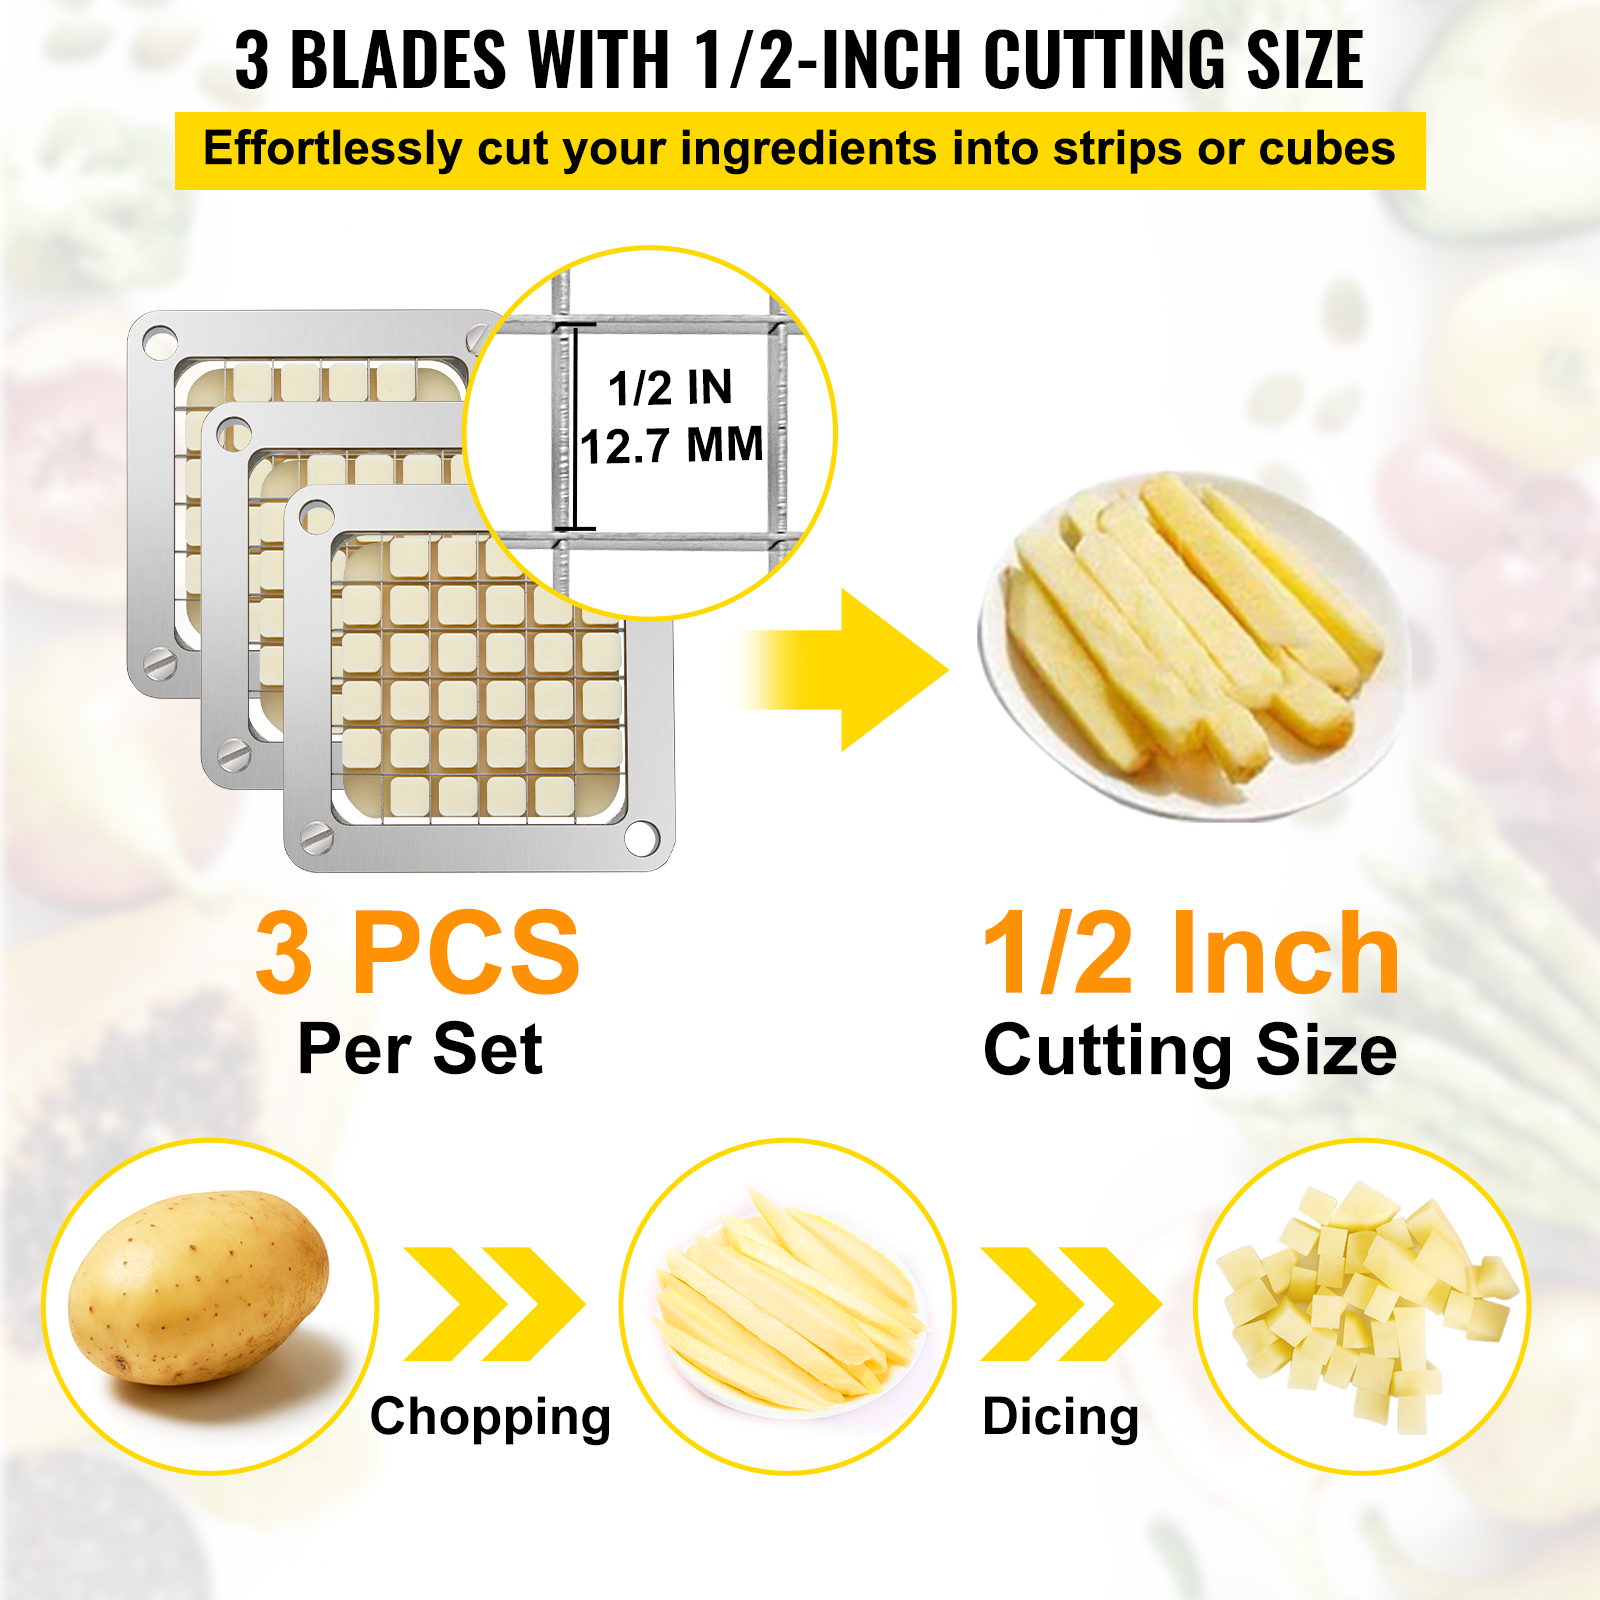 How a Fry Cutter Works & How to Replace the Blades